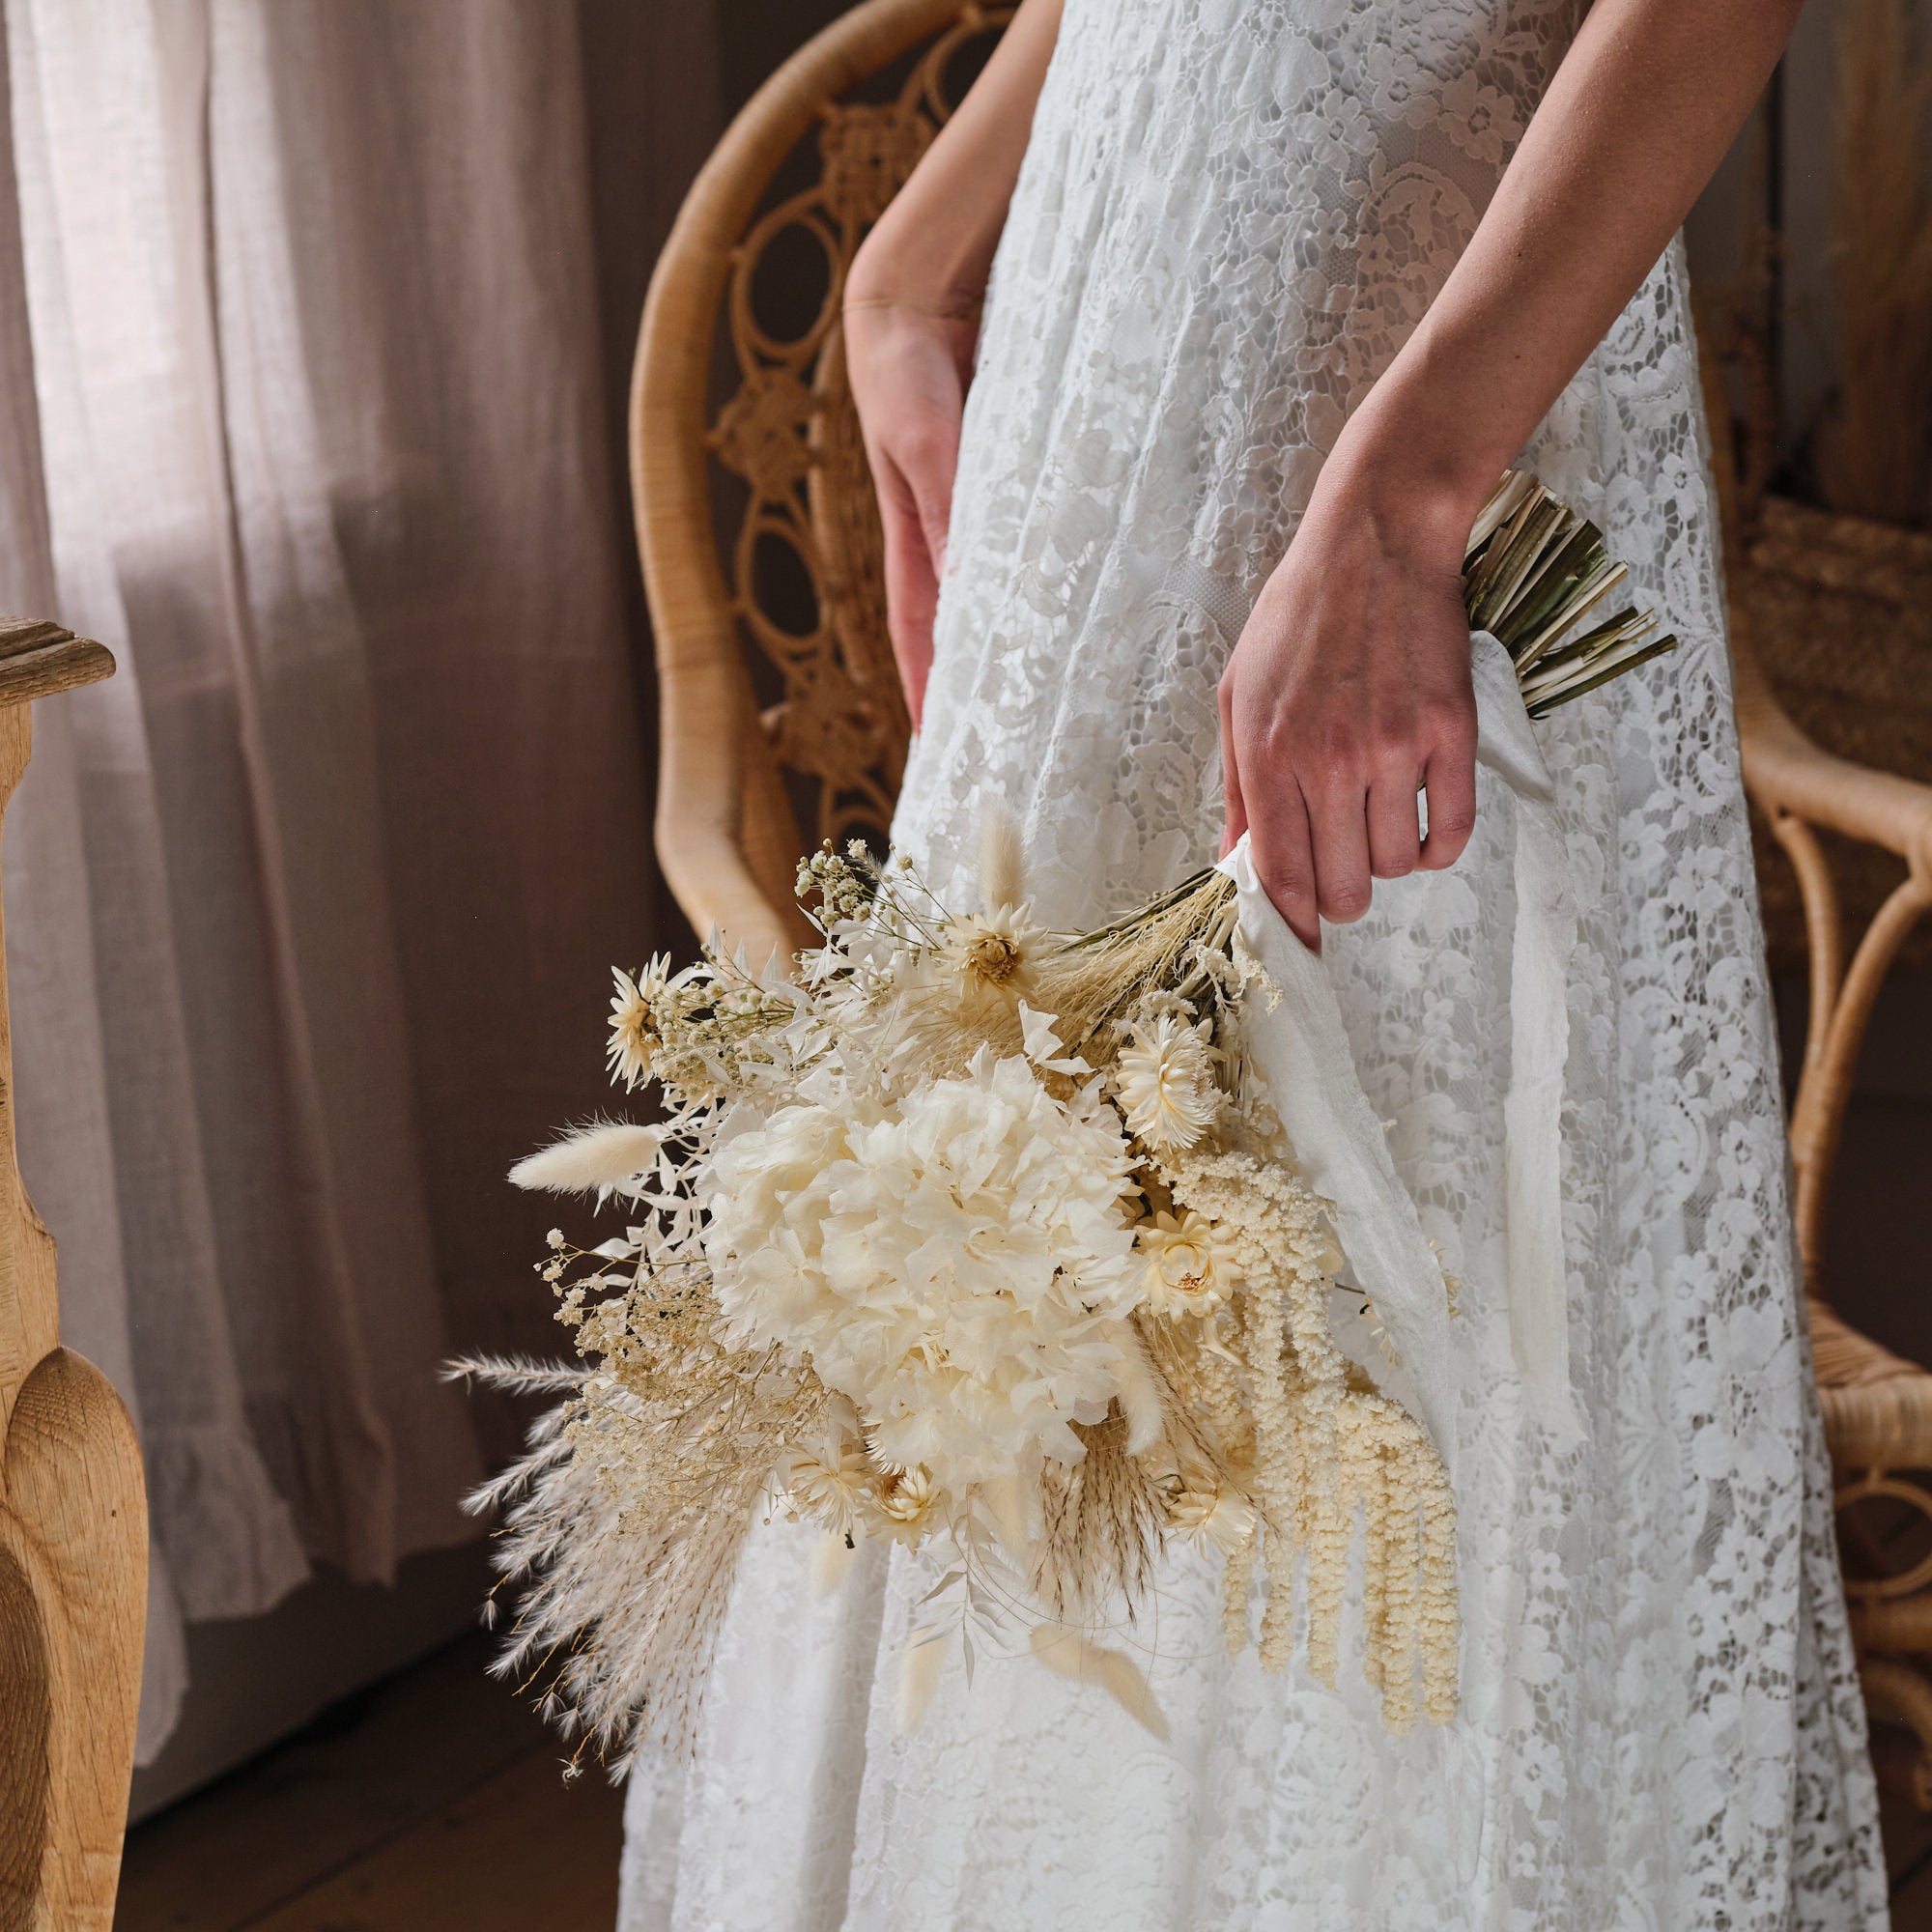 dried bridal bouquet with white, off-white and cream preserved flowers